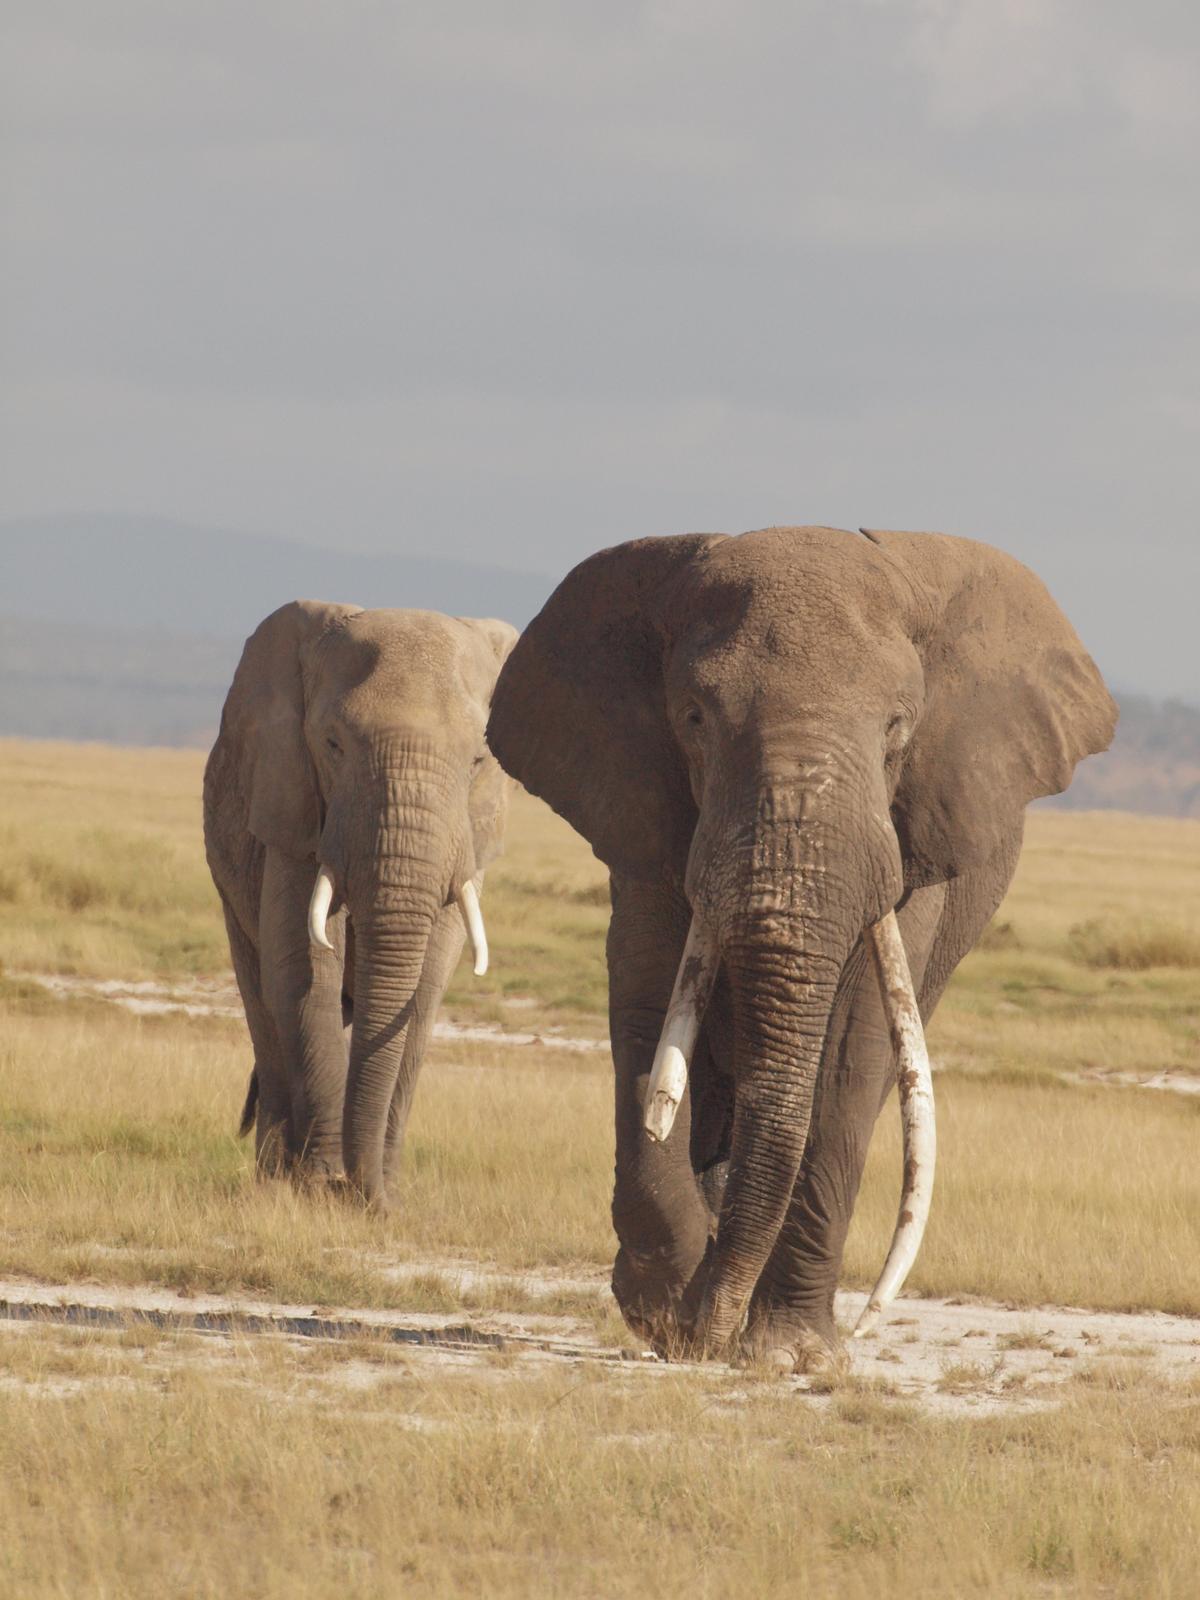 Elephants are abundant in many of the parks and will walk right past safari vehicles. (Kevin Revolinski)